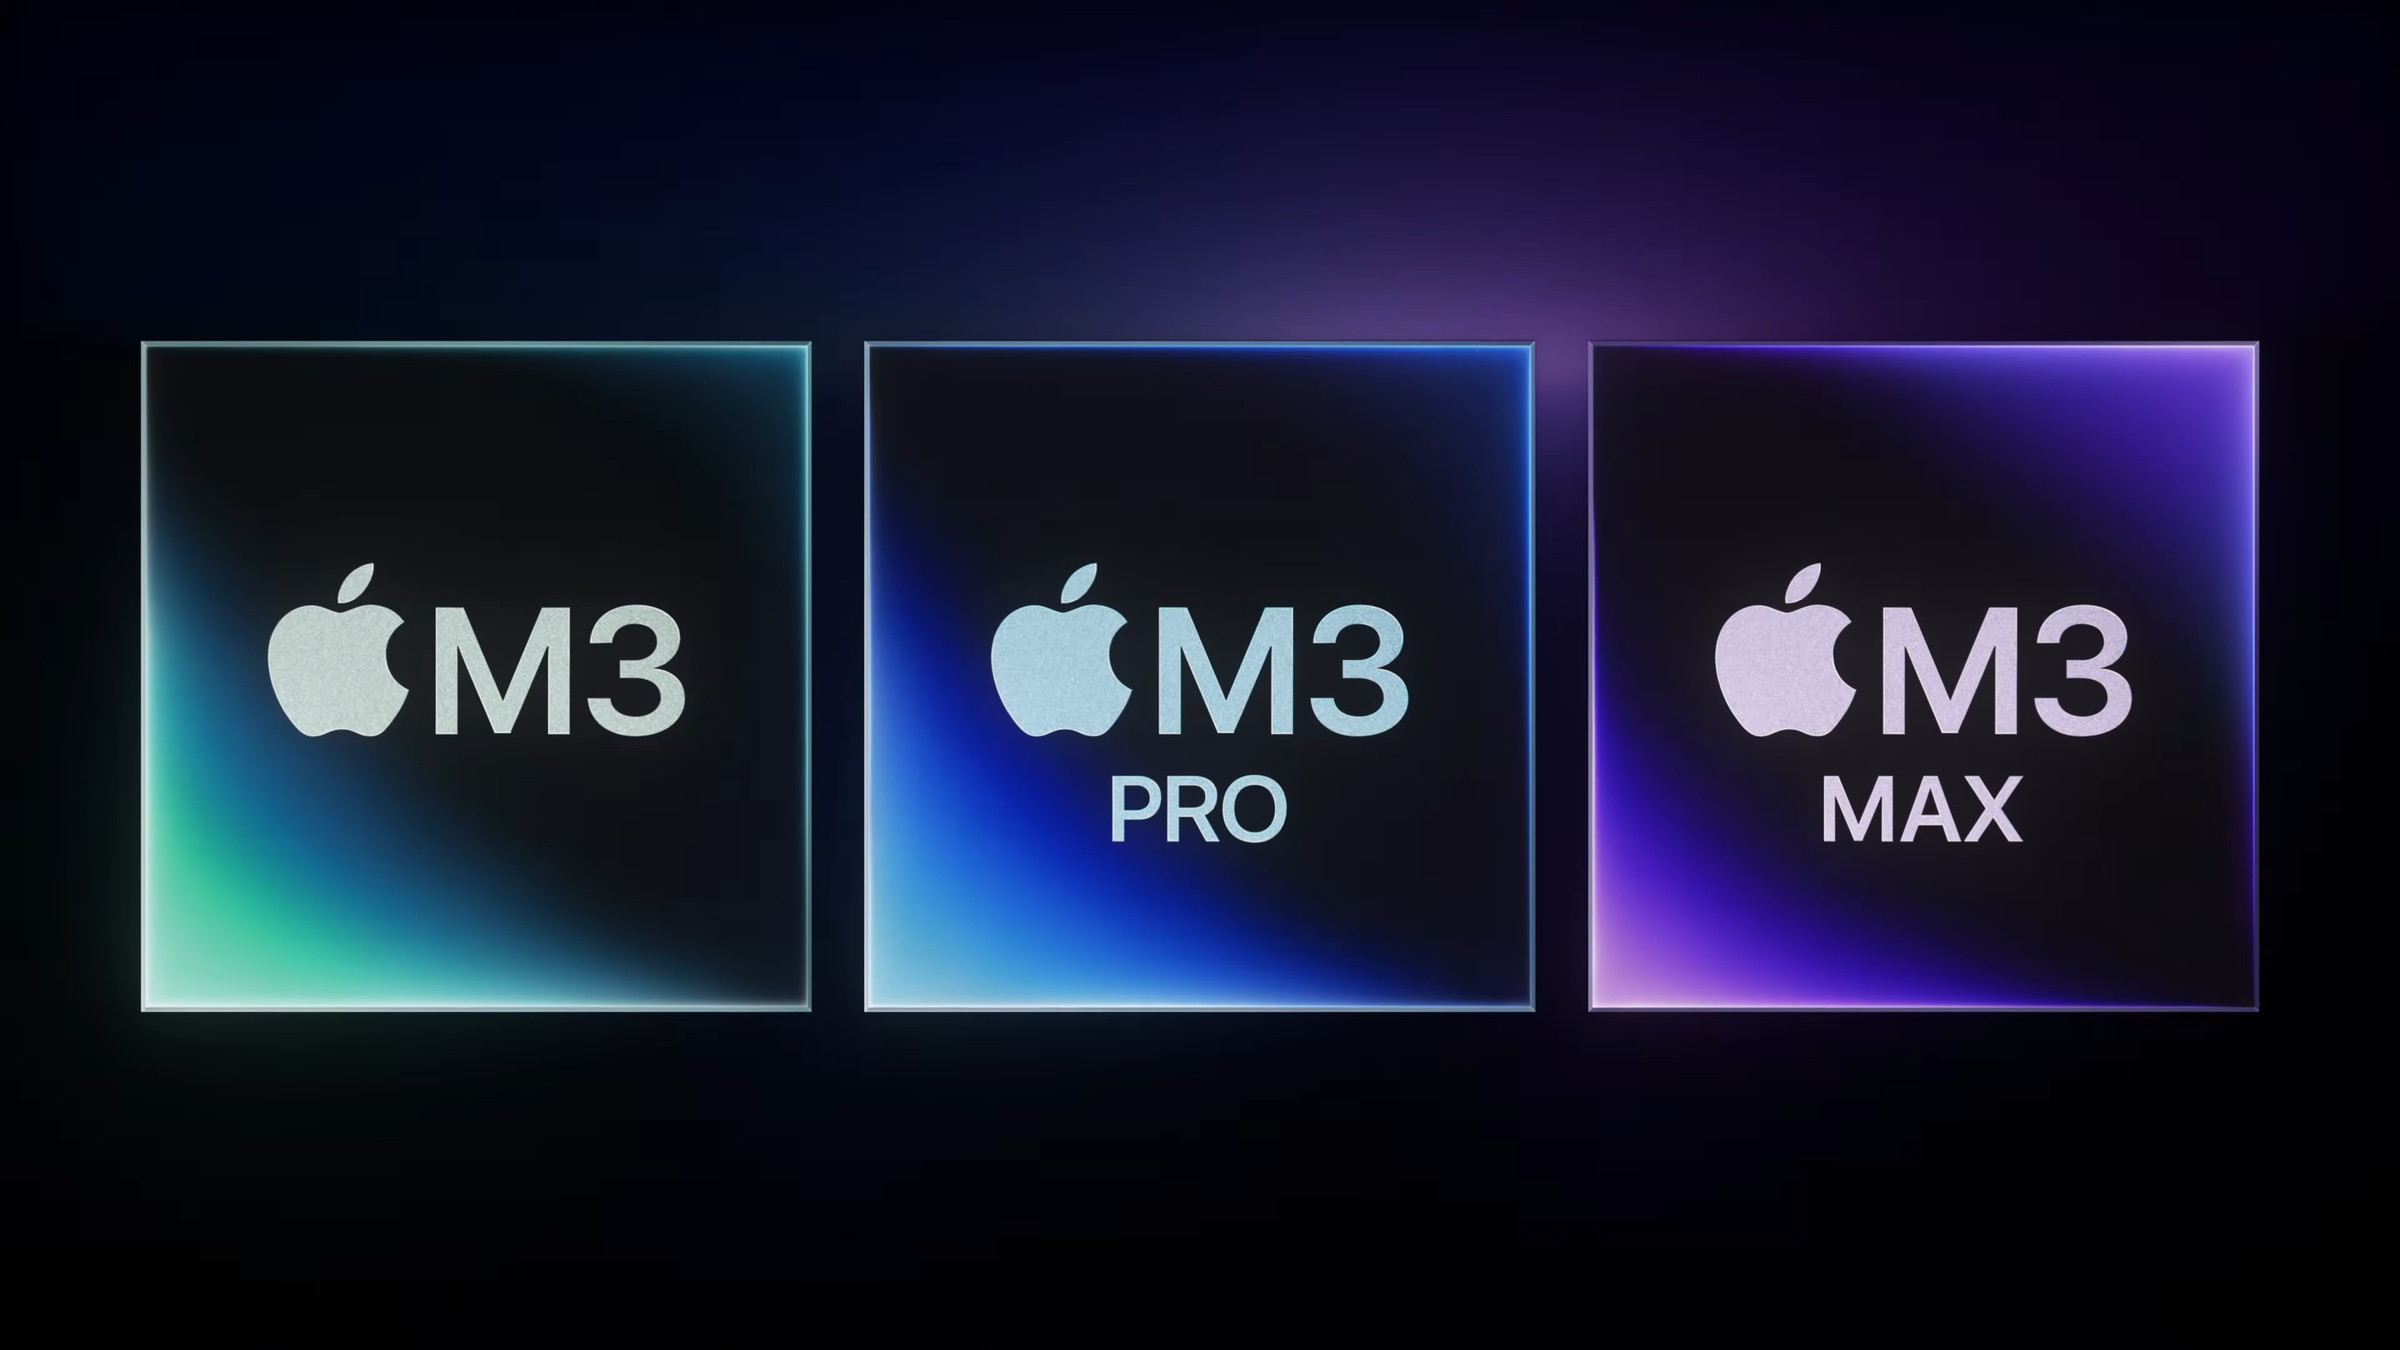 Apple’s art for its M3, M3 Pro, and M3 Max chips.